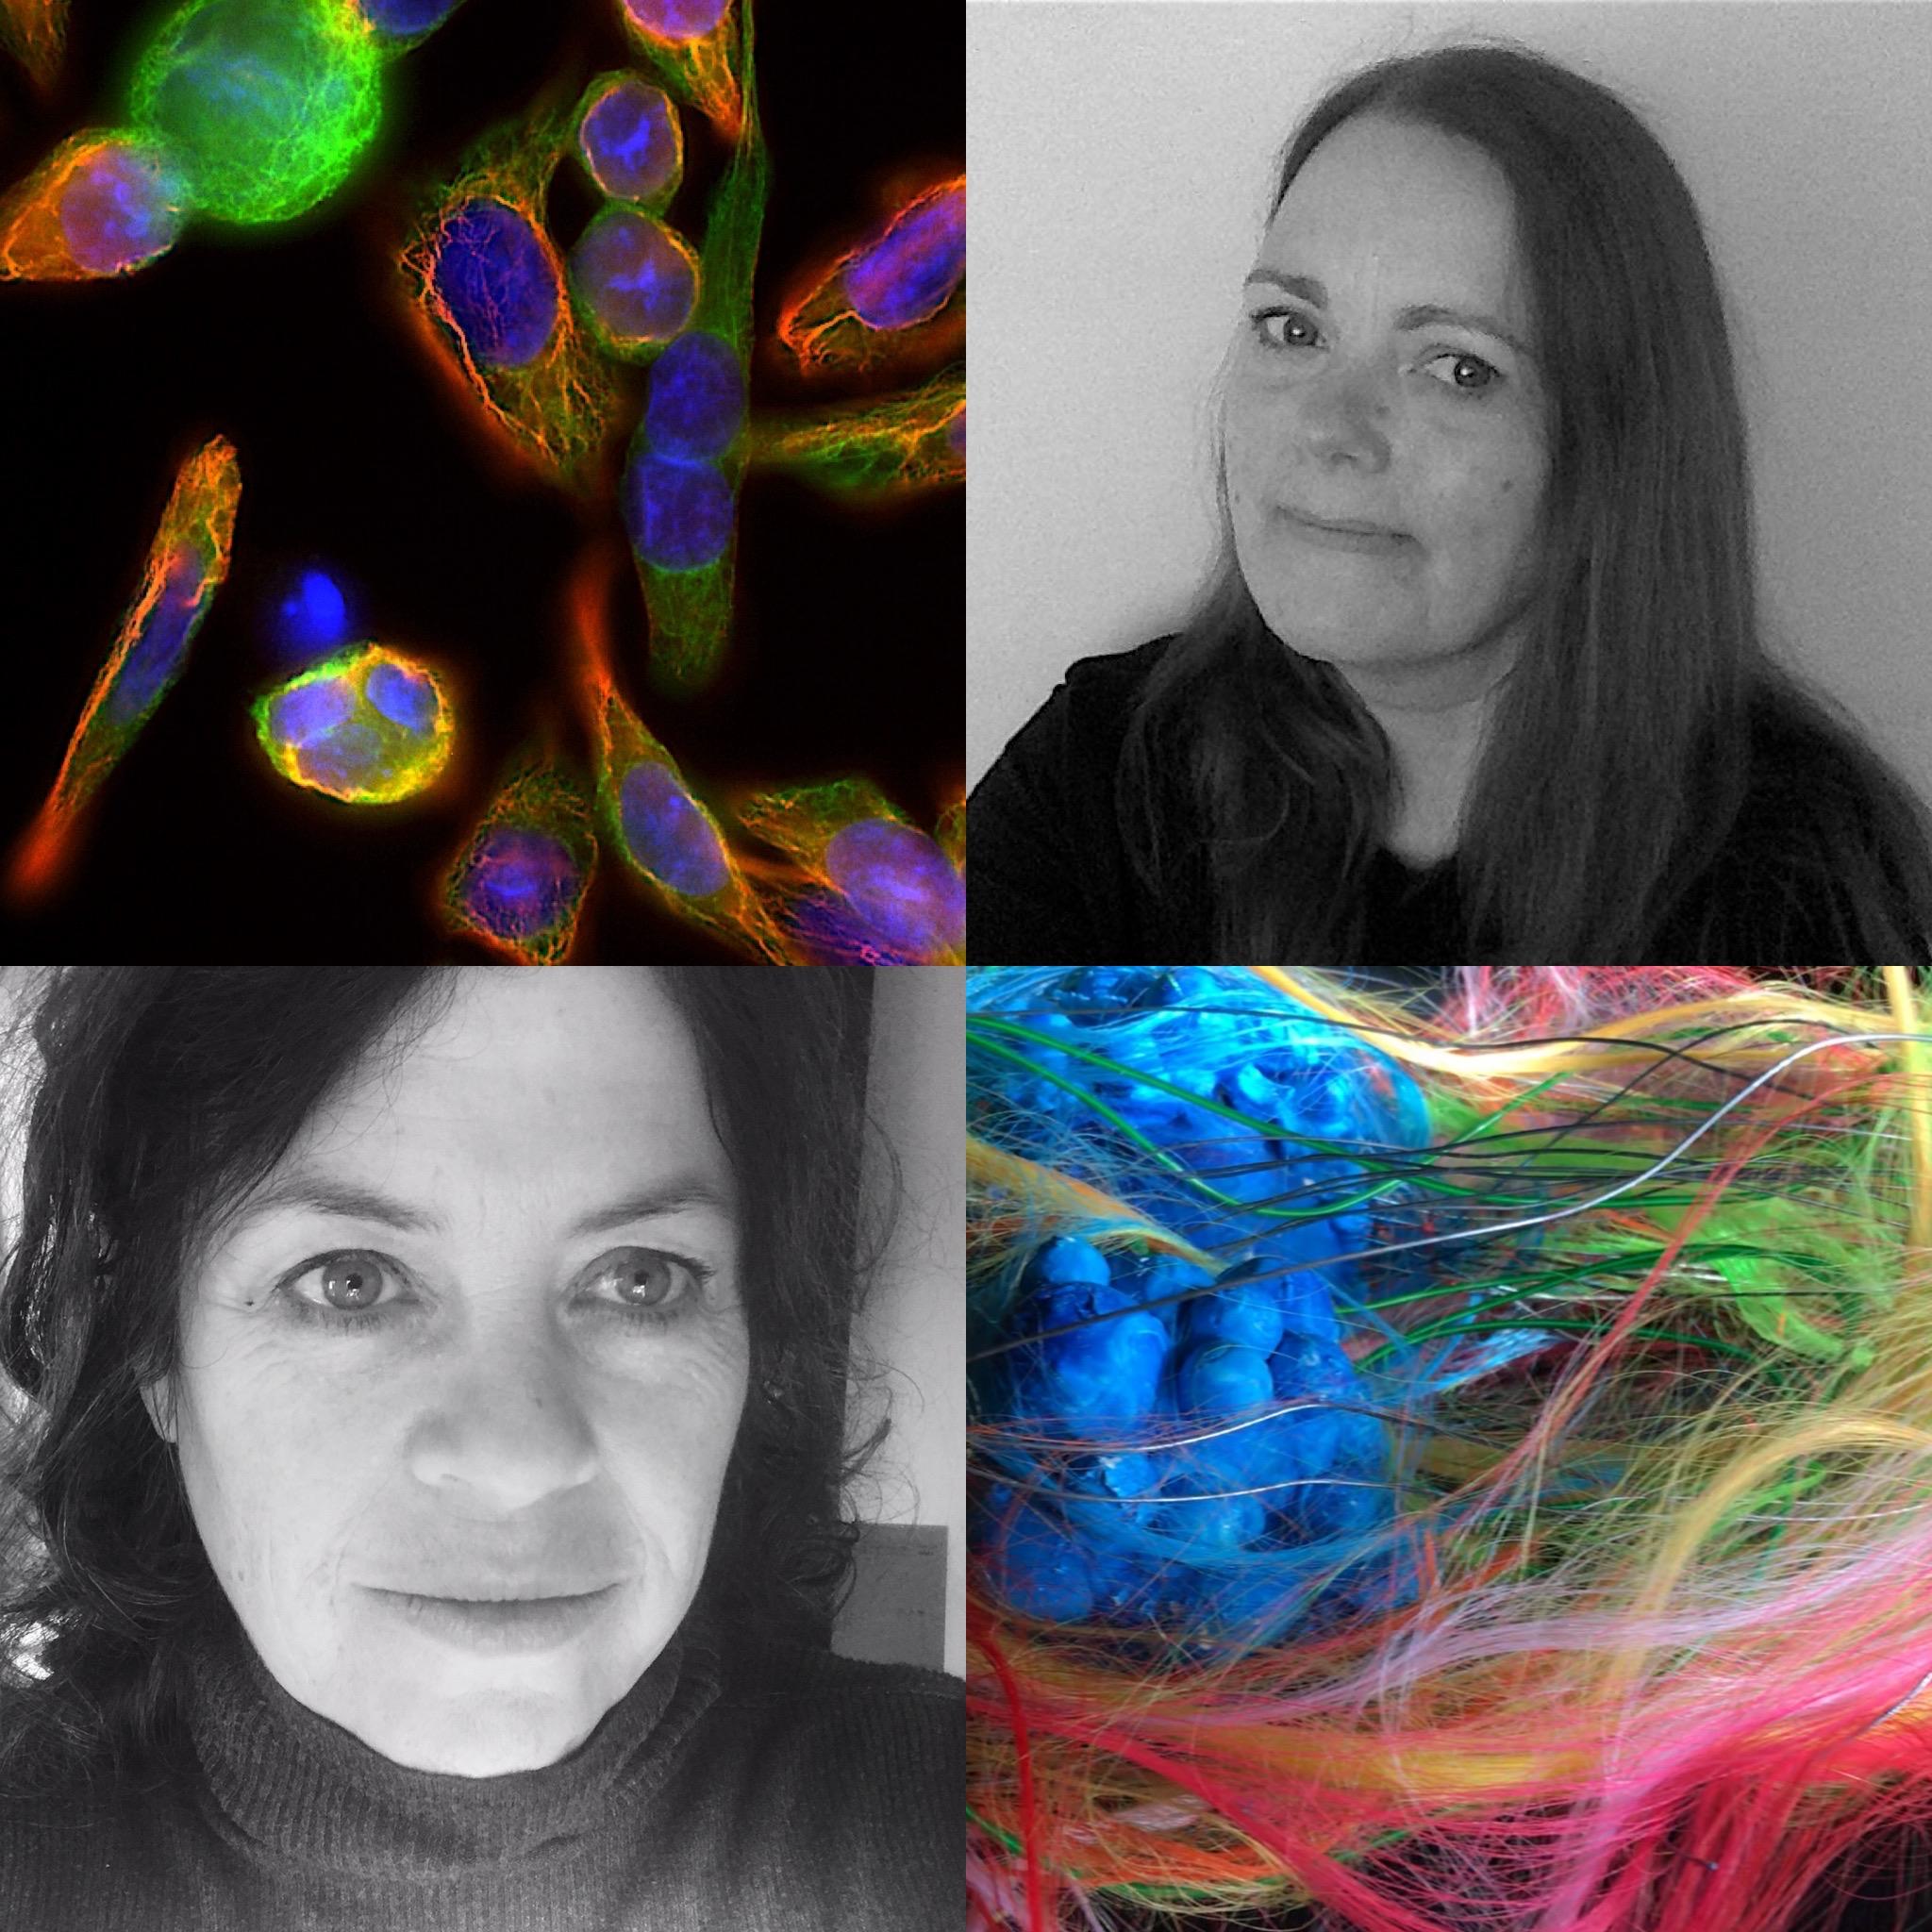 Collage of both project investigators and cell images